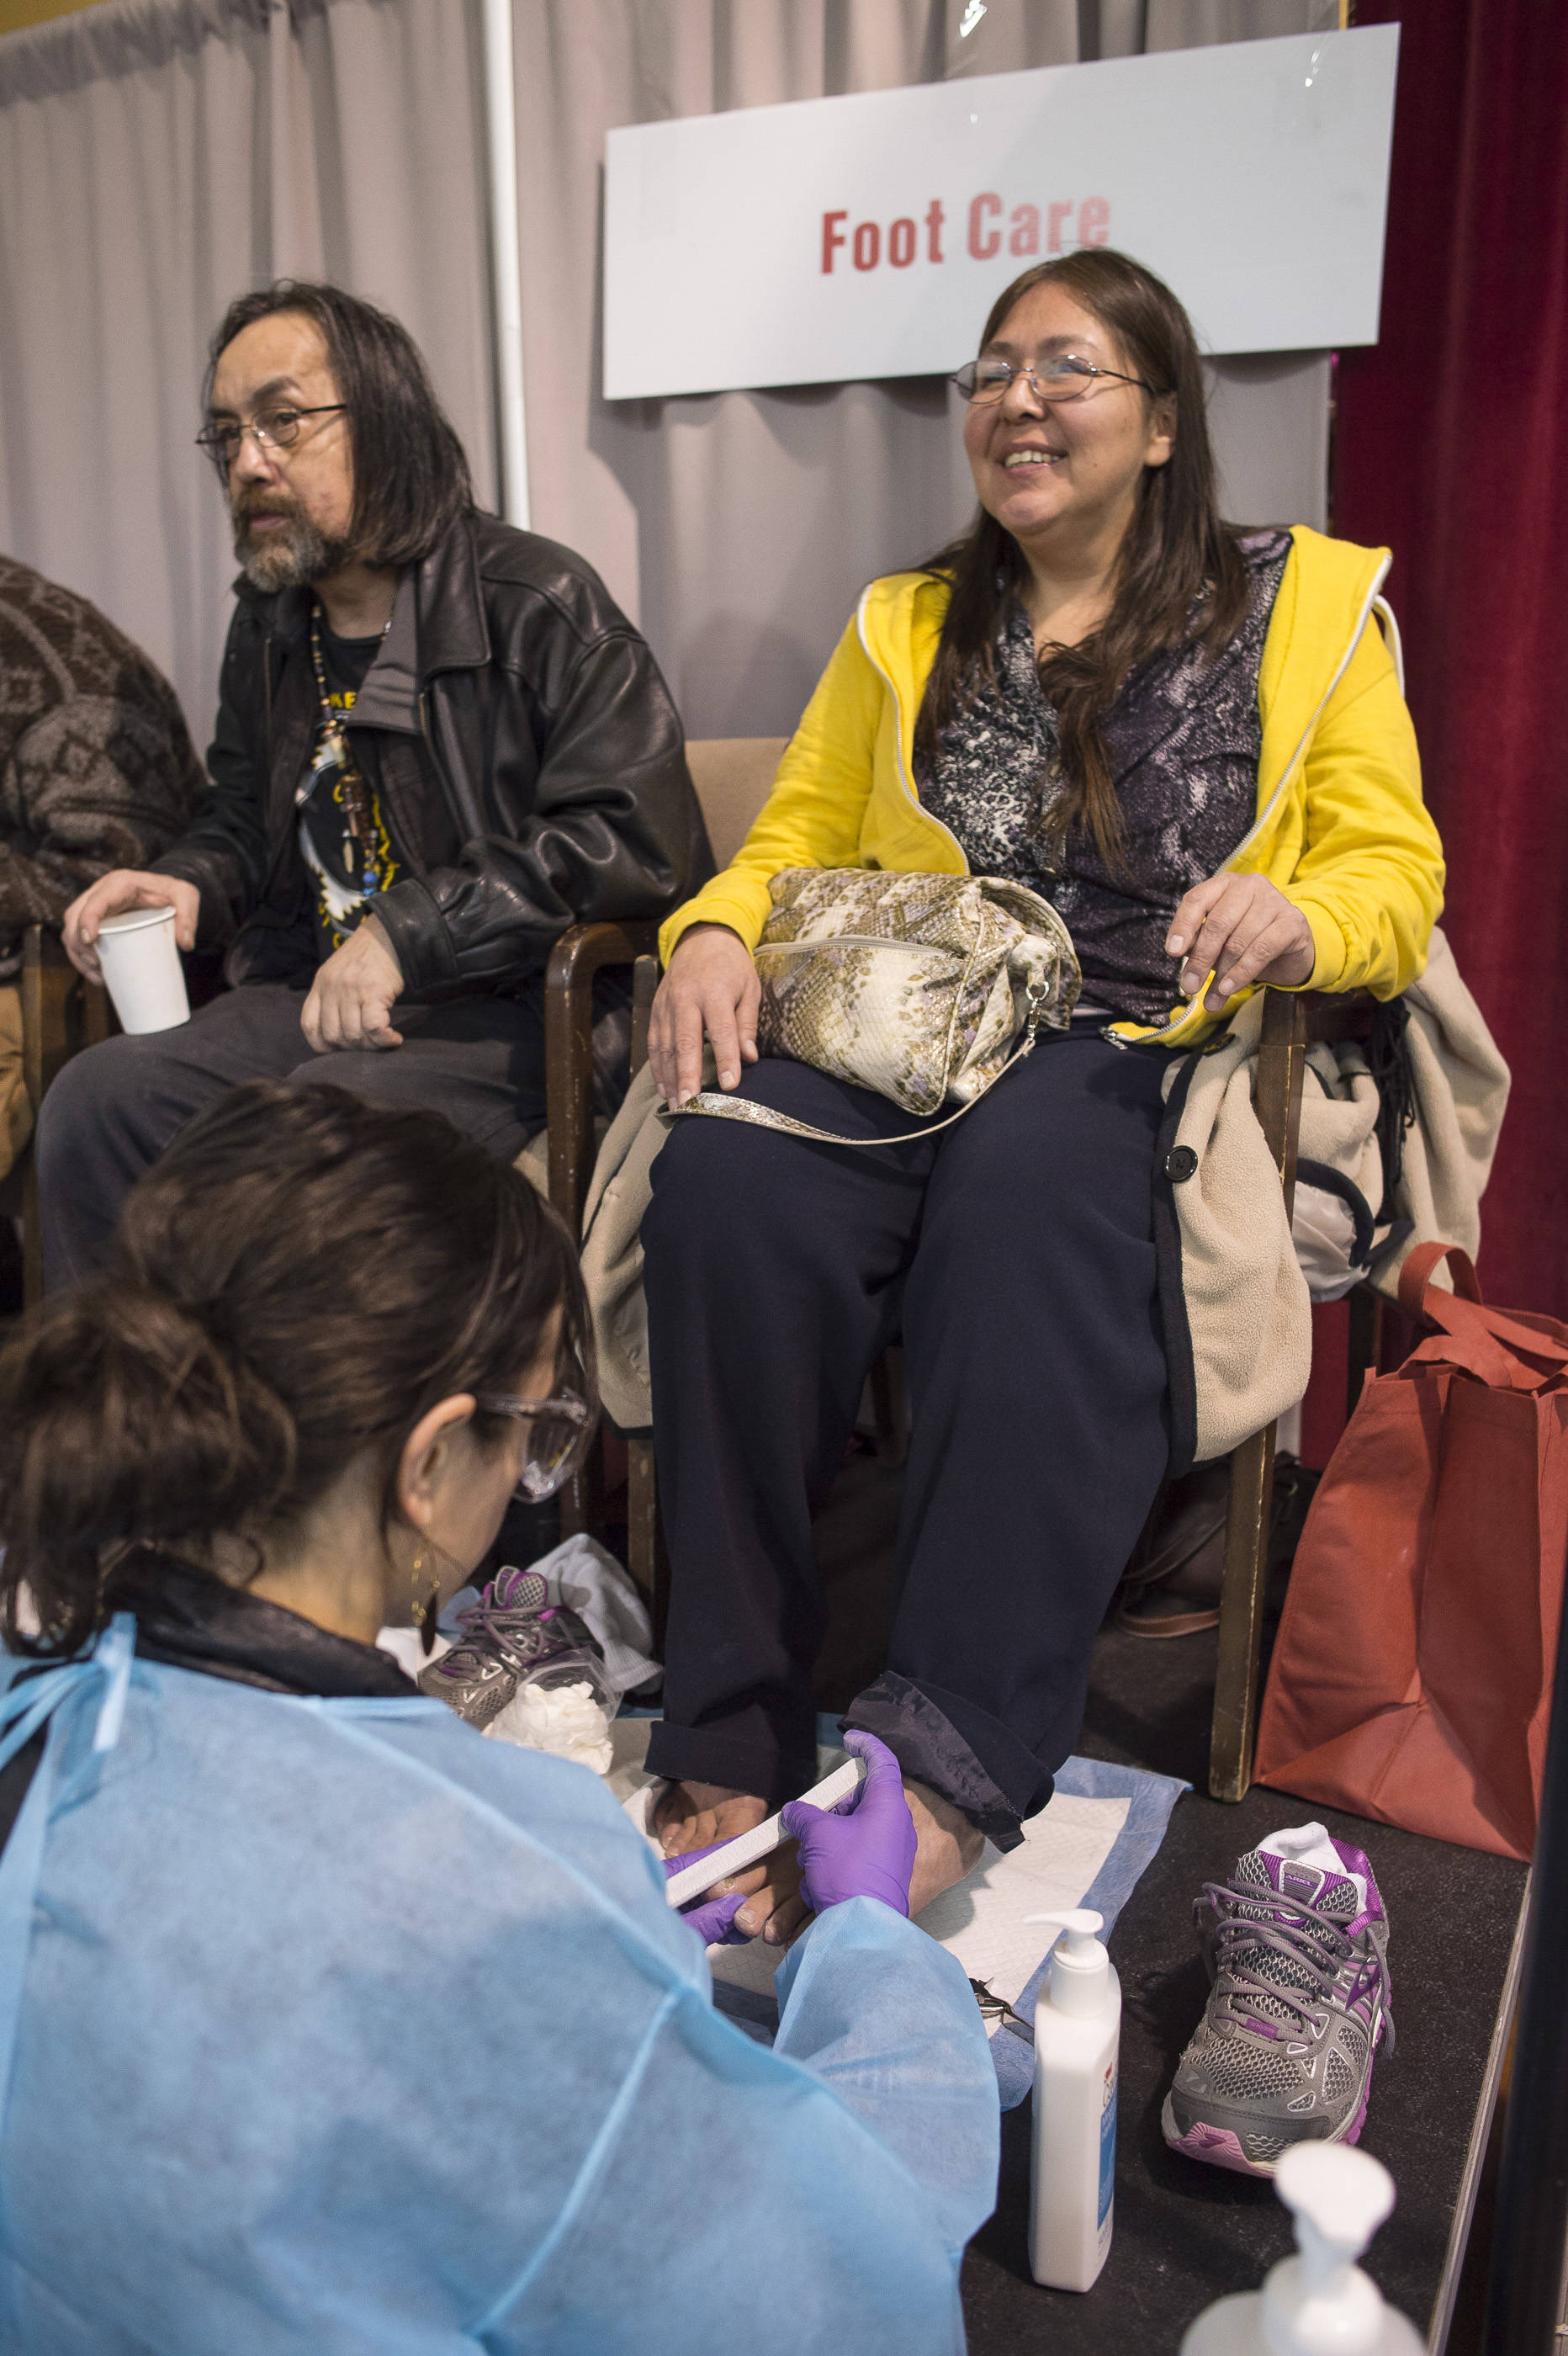 Heather Lee, right, and Michael George Patterson receive foot care during the Juneau Coalition on Housing & Homelessness’ 7th annual Project Homeless Connect in the Juneau Arts & Culture Center on Wednesday, Jan. 24, 2018. (Michael Penn | Juneau Empire)